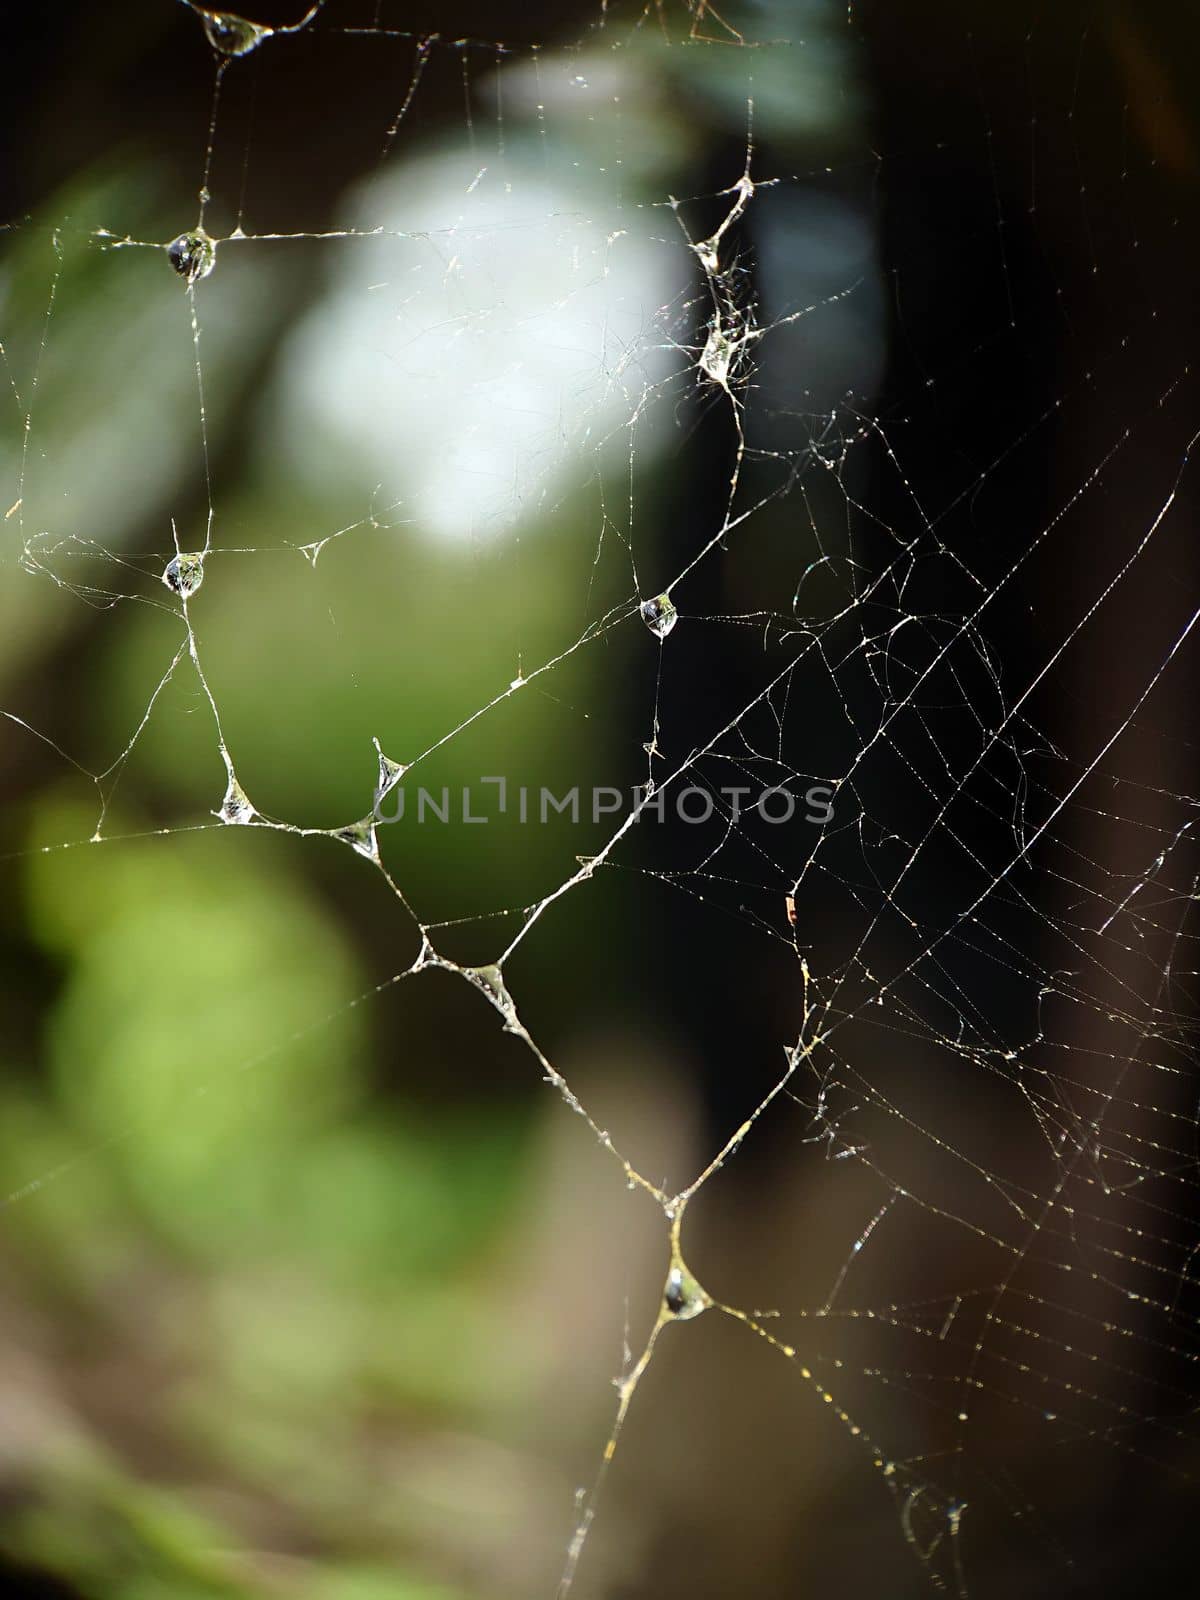 Background image of a wet web in the afternoon by Mastak80